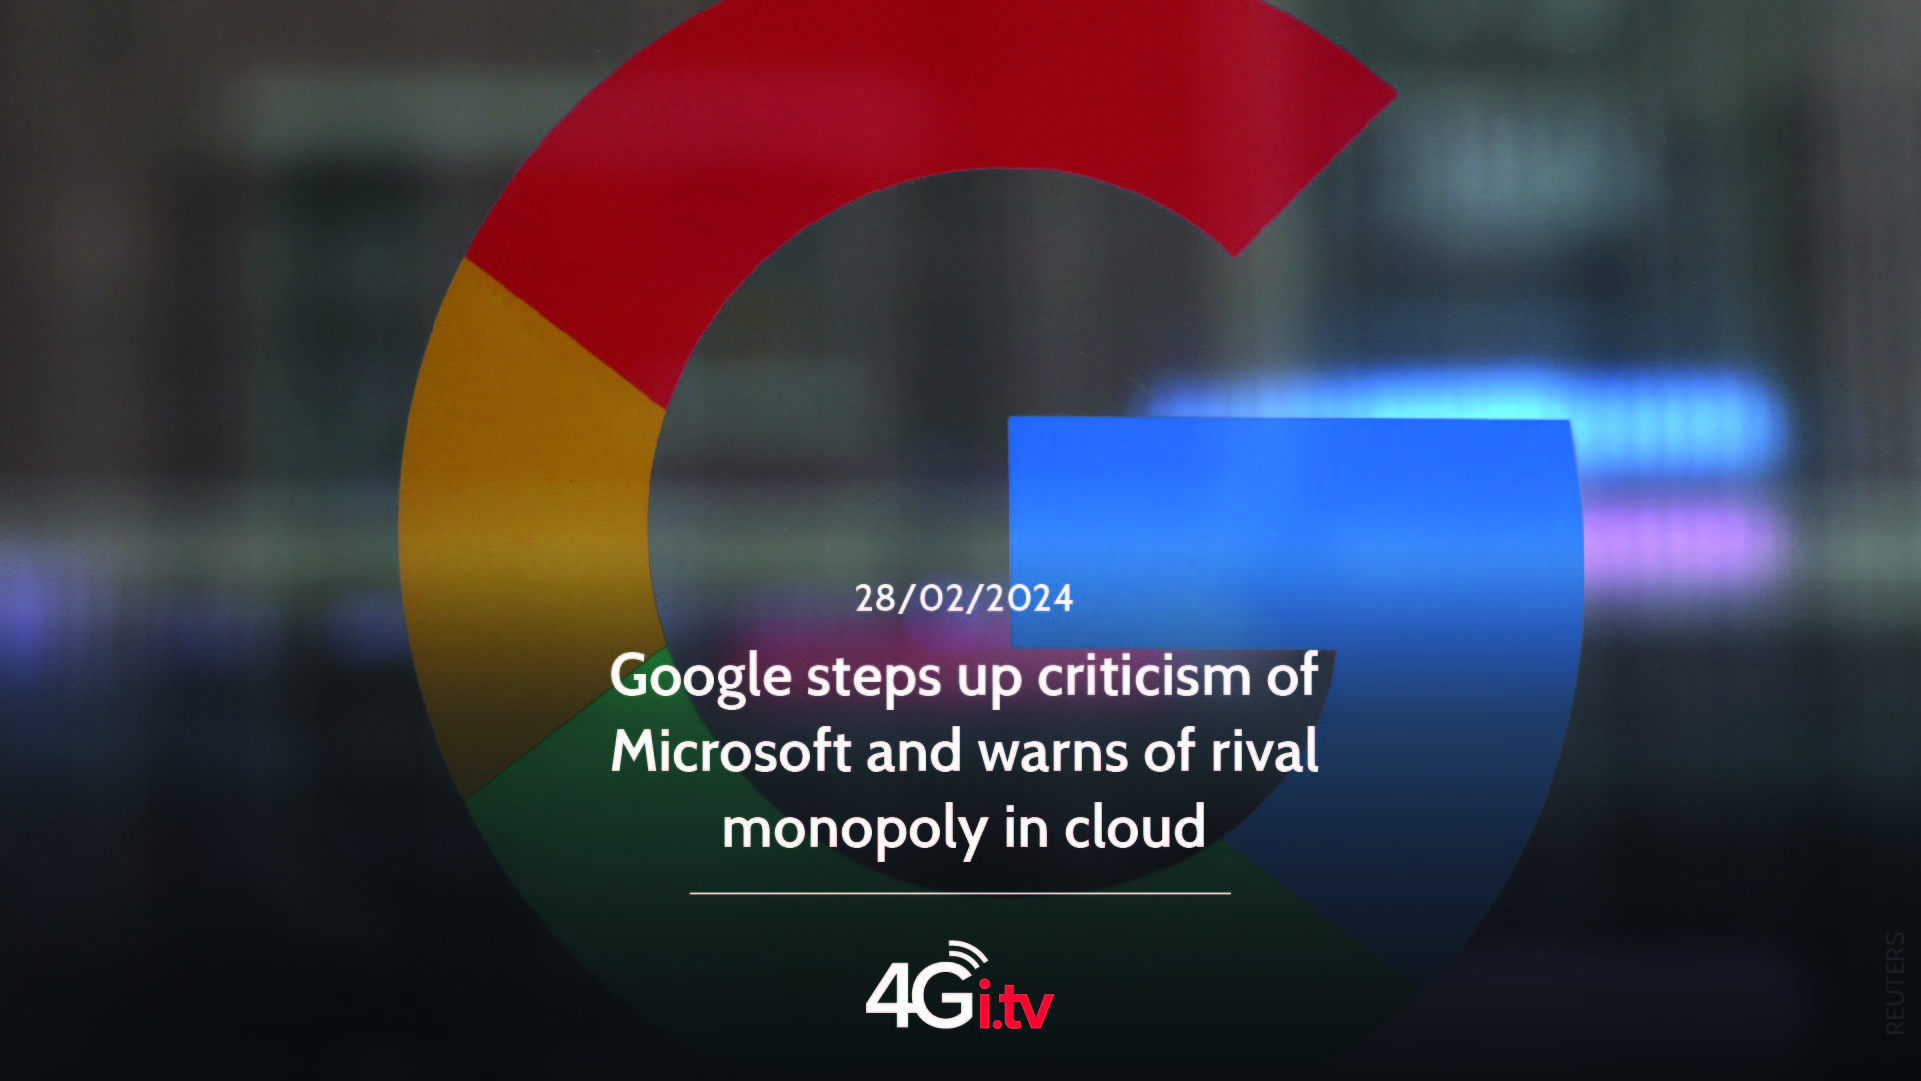 Lesen Sie mehr über den Artikel Google steps up criticism of Microsoft and warns of rival monopoly in cloud